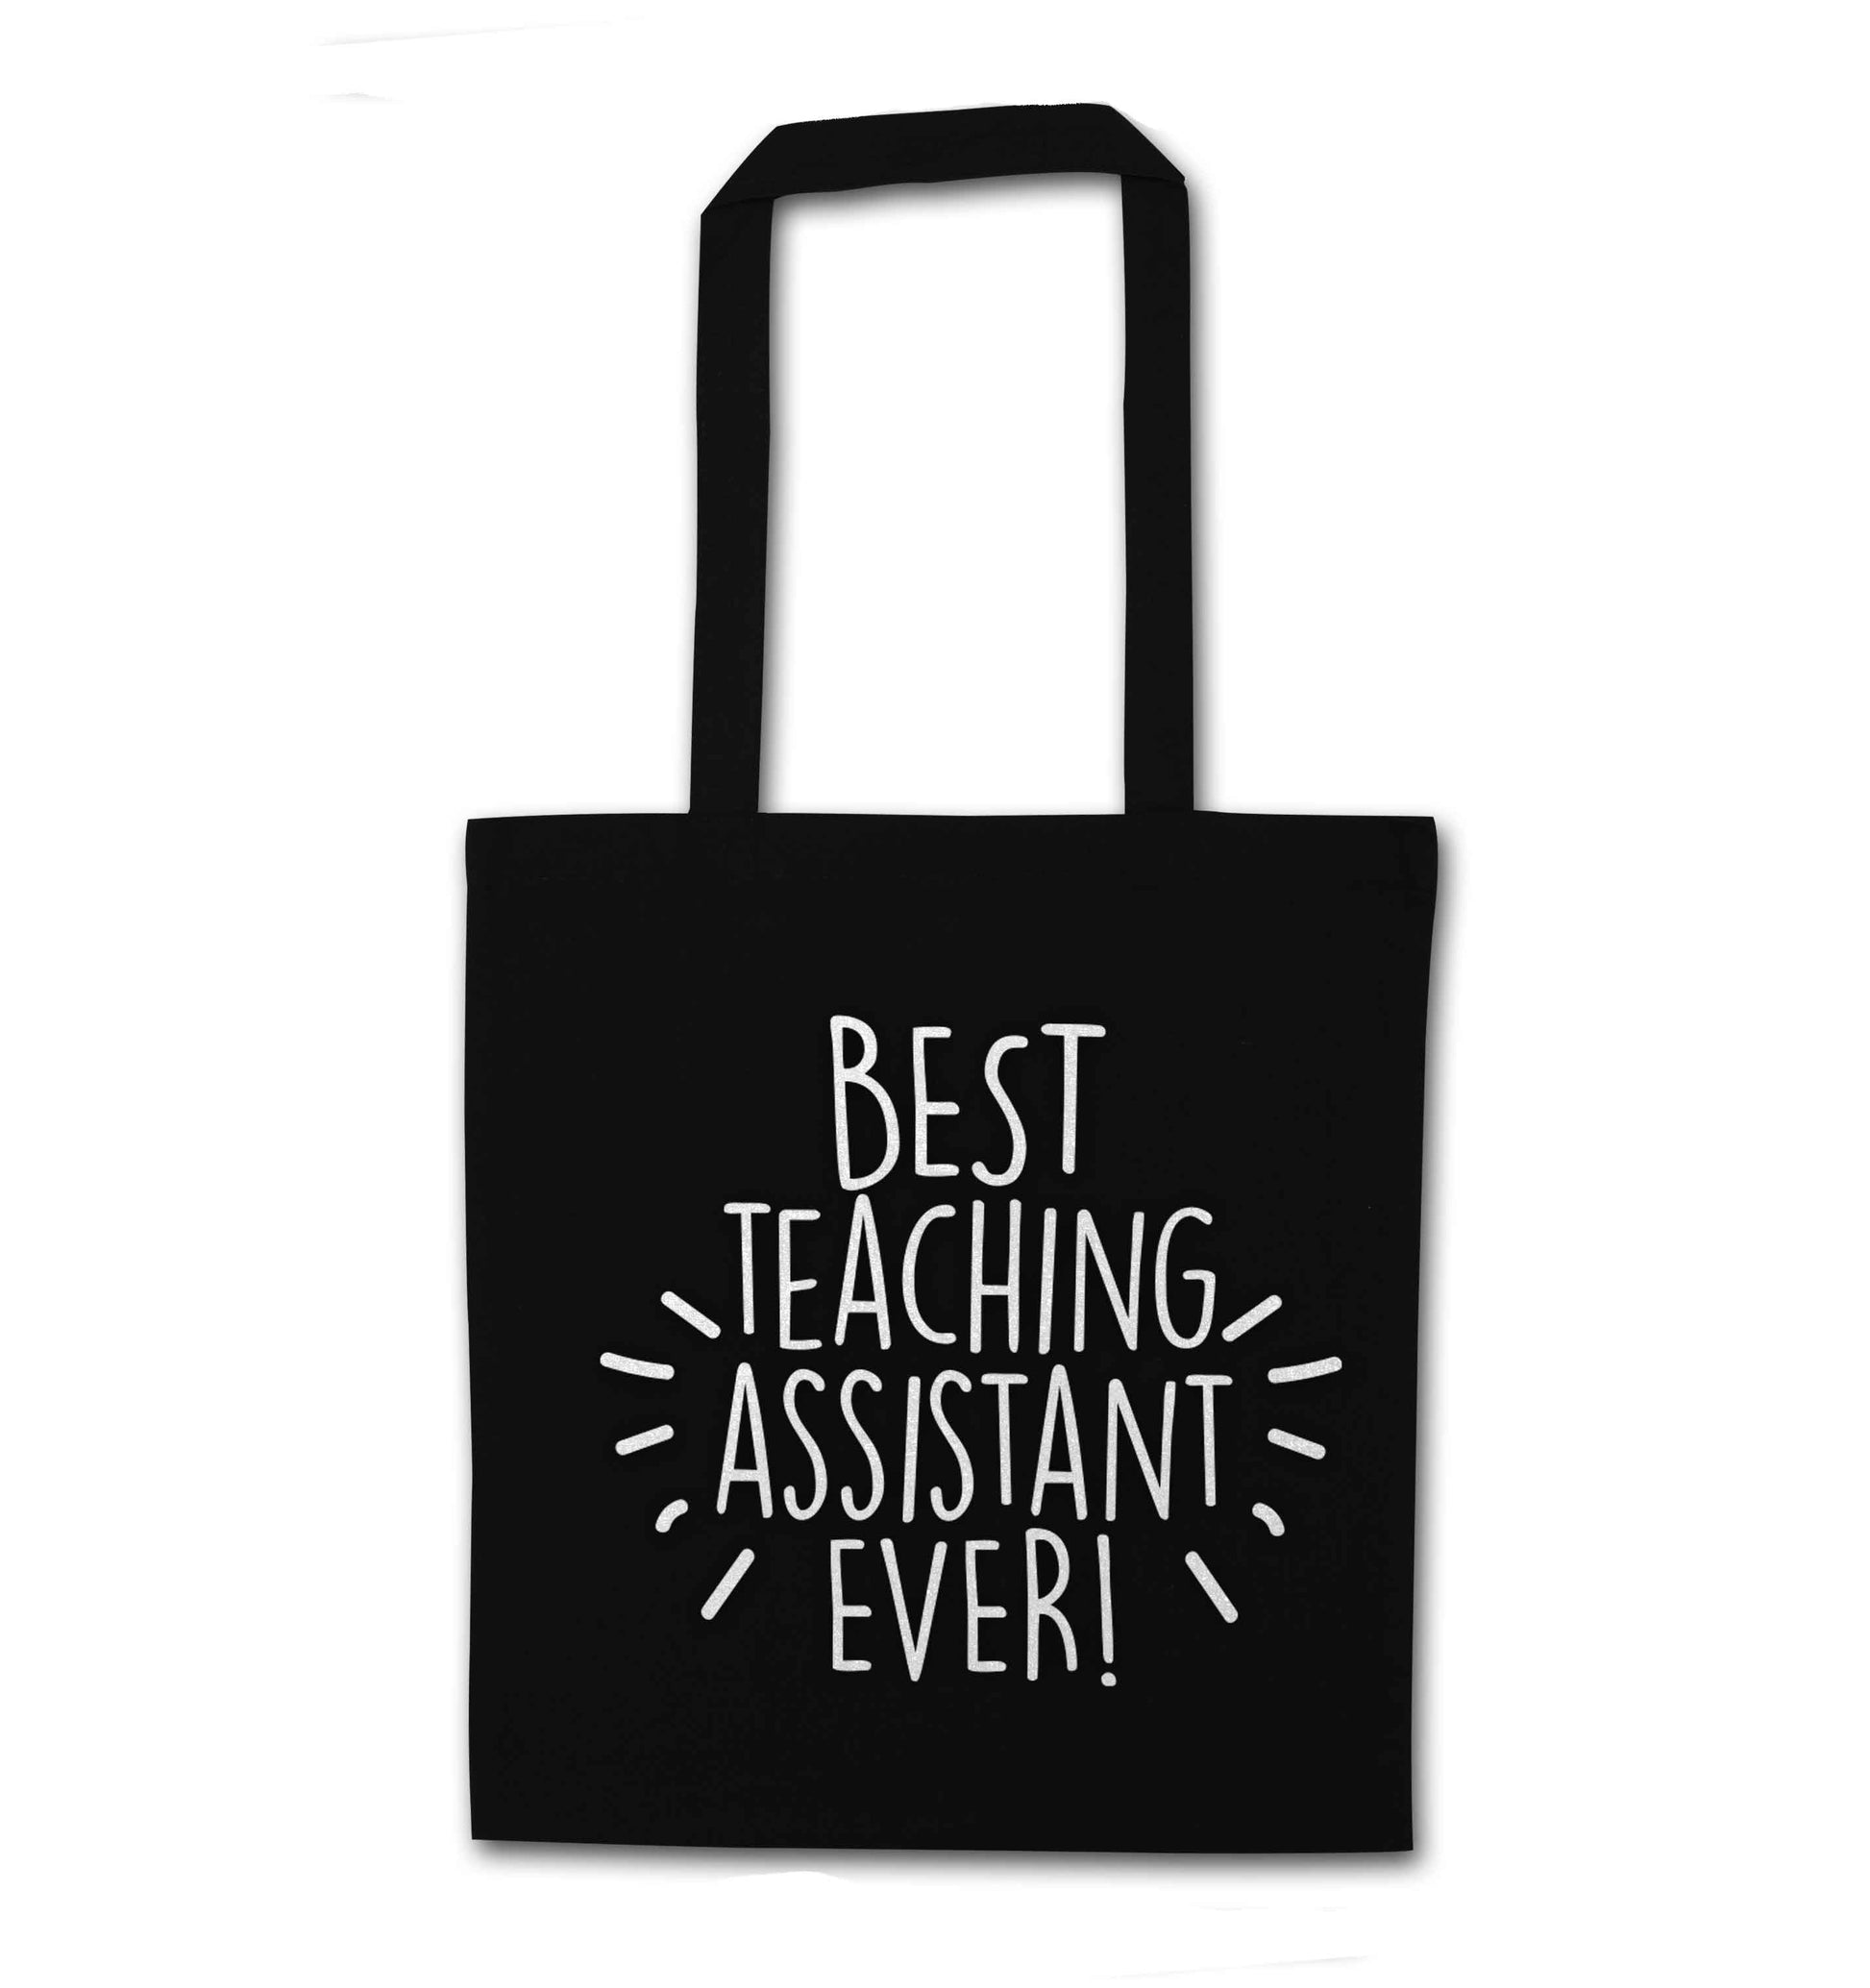 Best teaching assistant ever! black tote bag